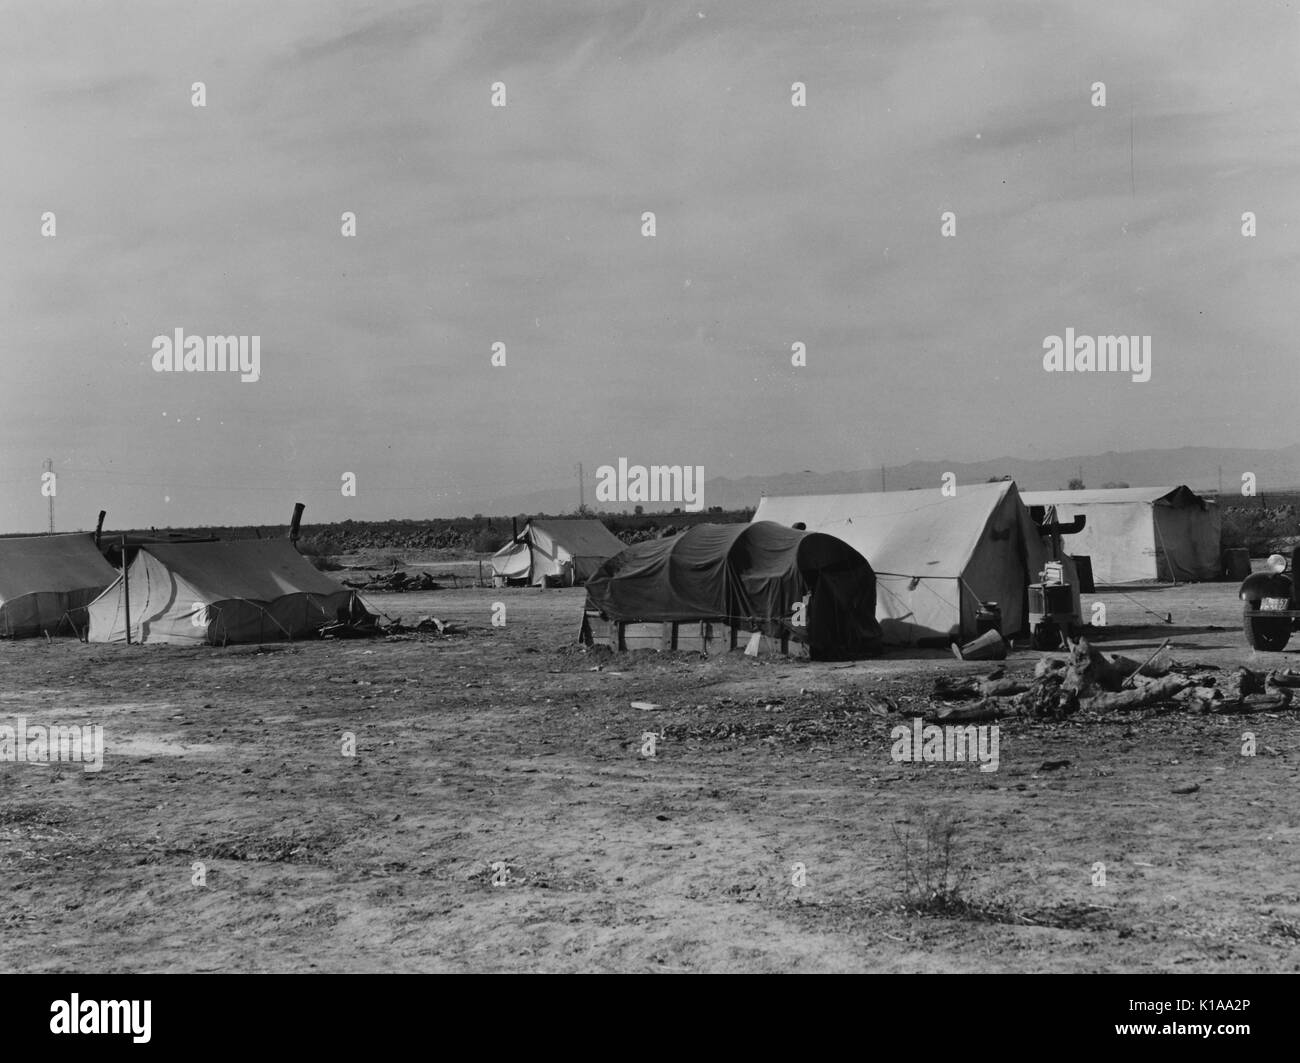 A wide angle shot of a squatters camp, the tents belong to farmers seeking work with cotton and potatoes after fleeing the drought, Kern County, California, 1937. From the New York Public Library. Stock Photo